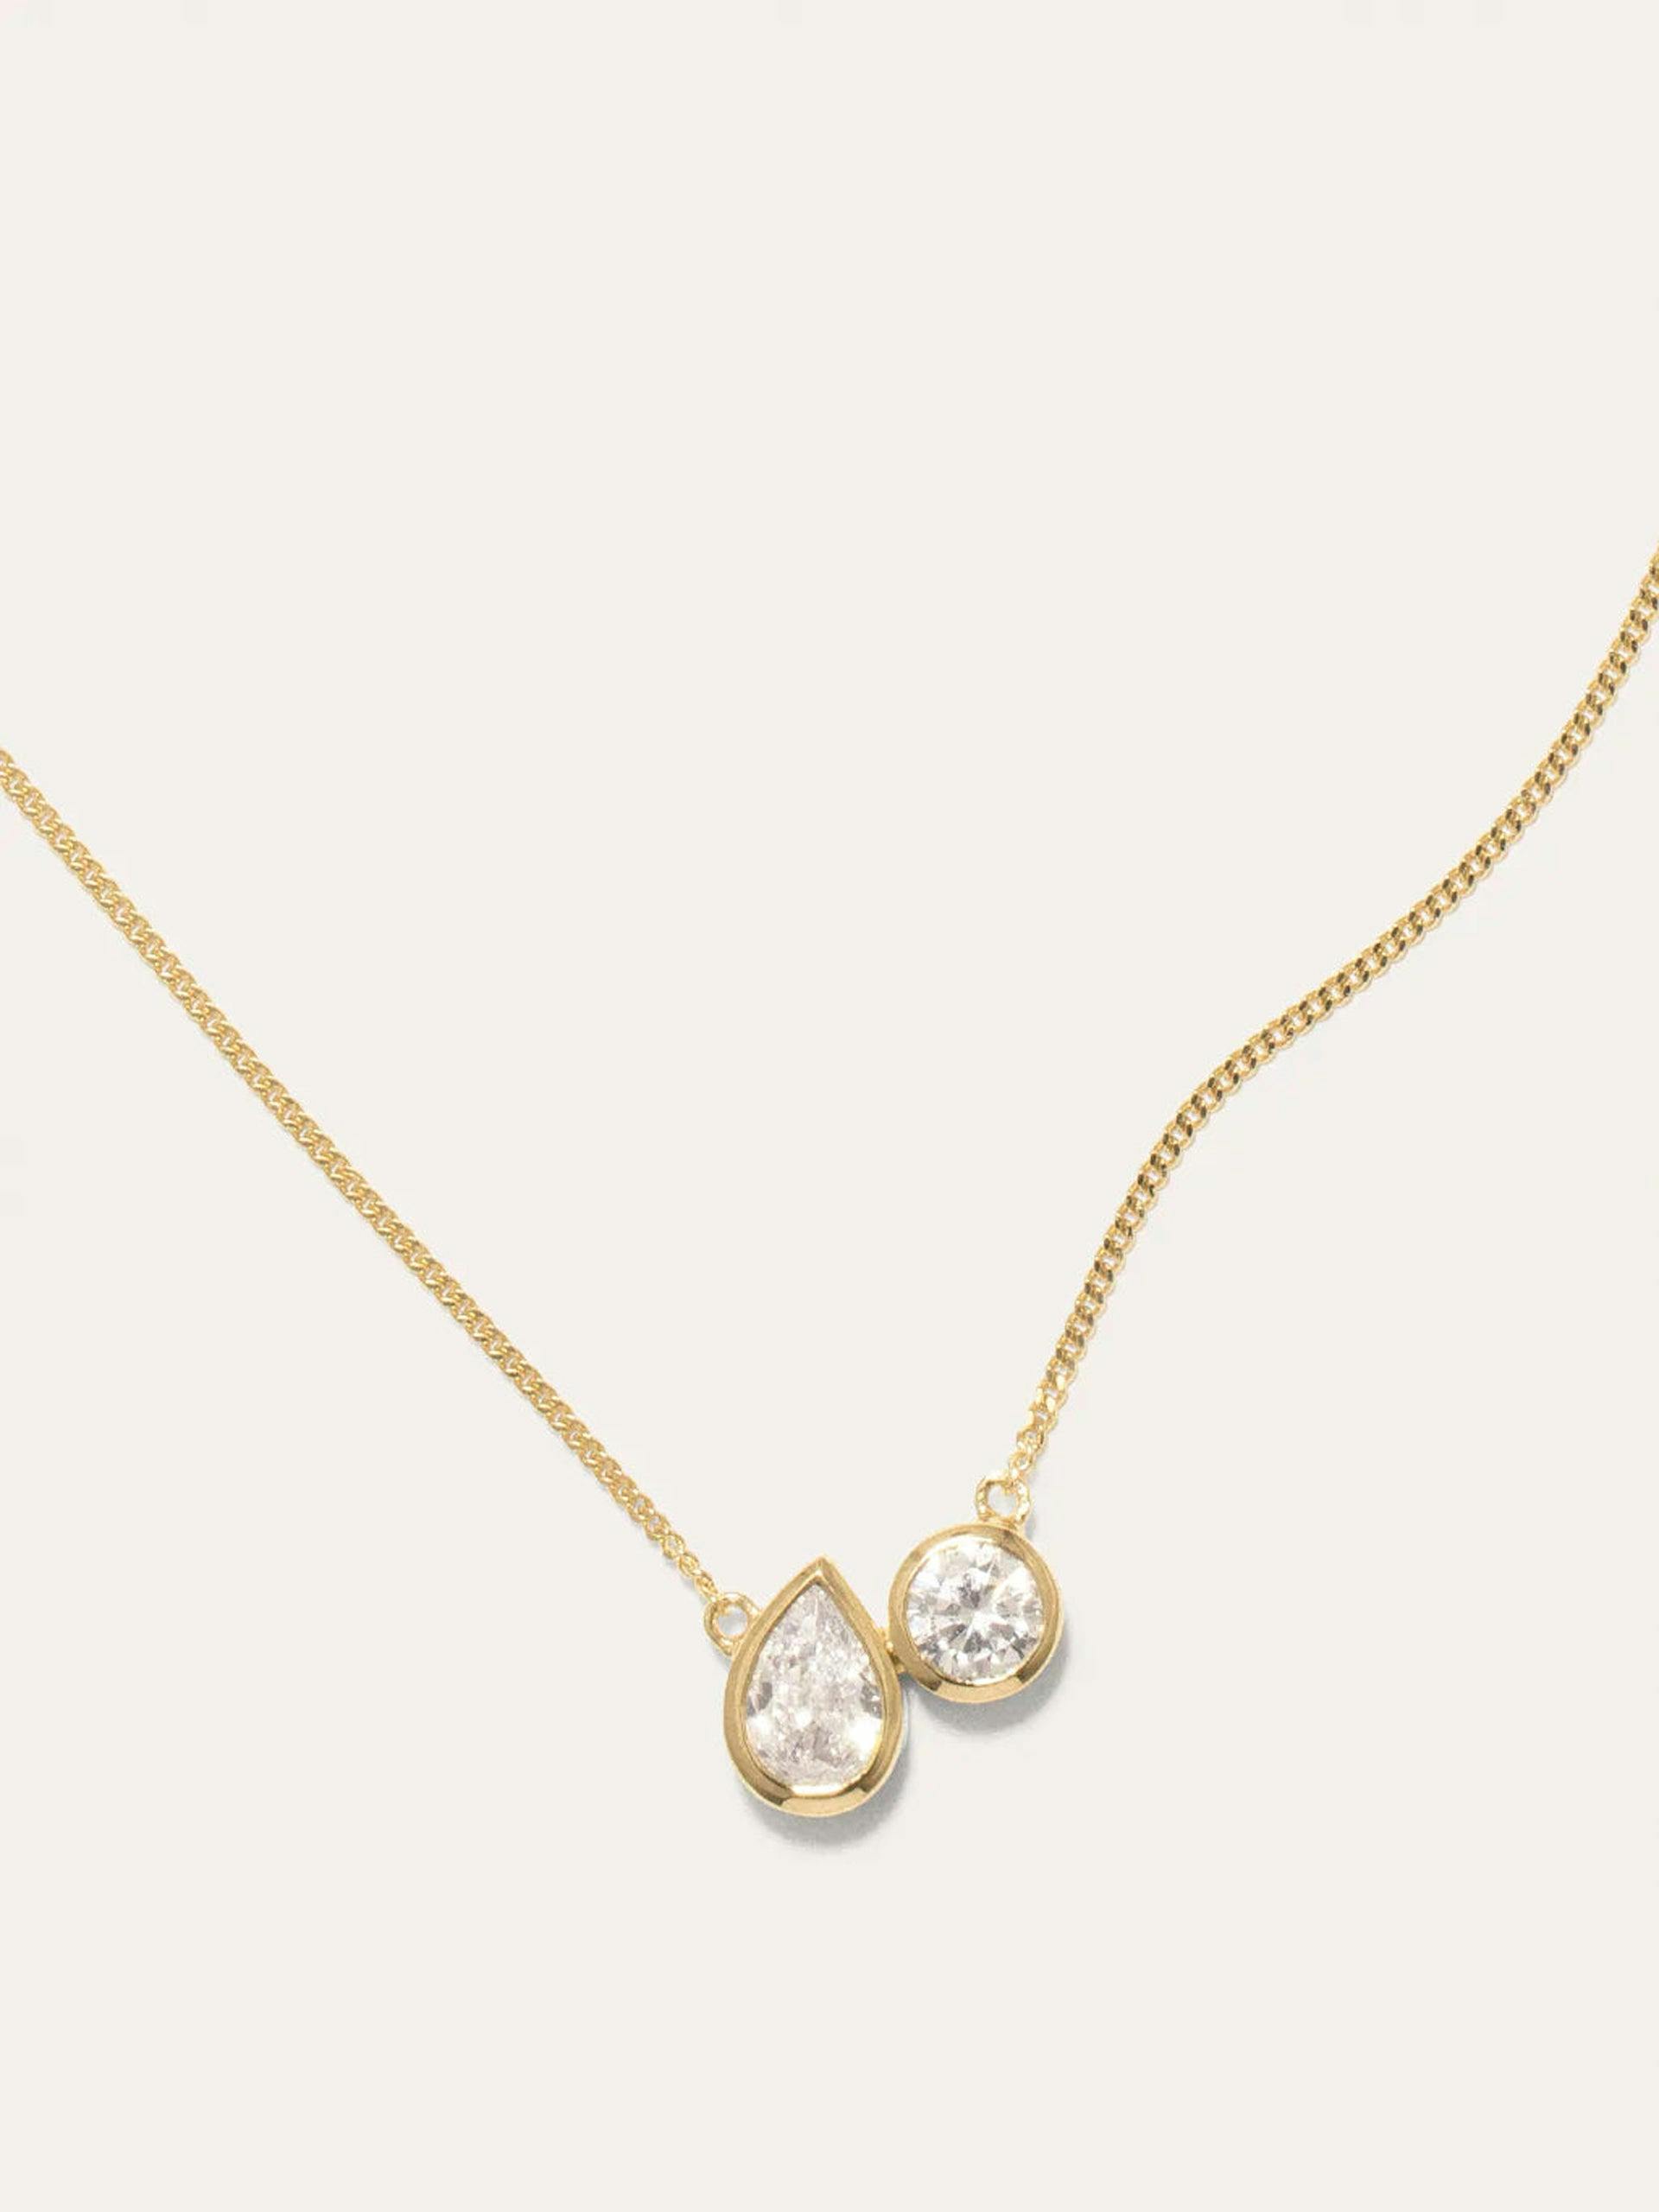 "Like Peas in a Pod" cubic zirconia and gold vermeil pendant